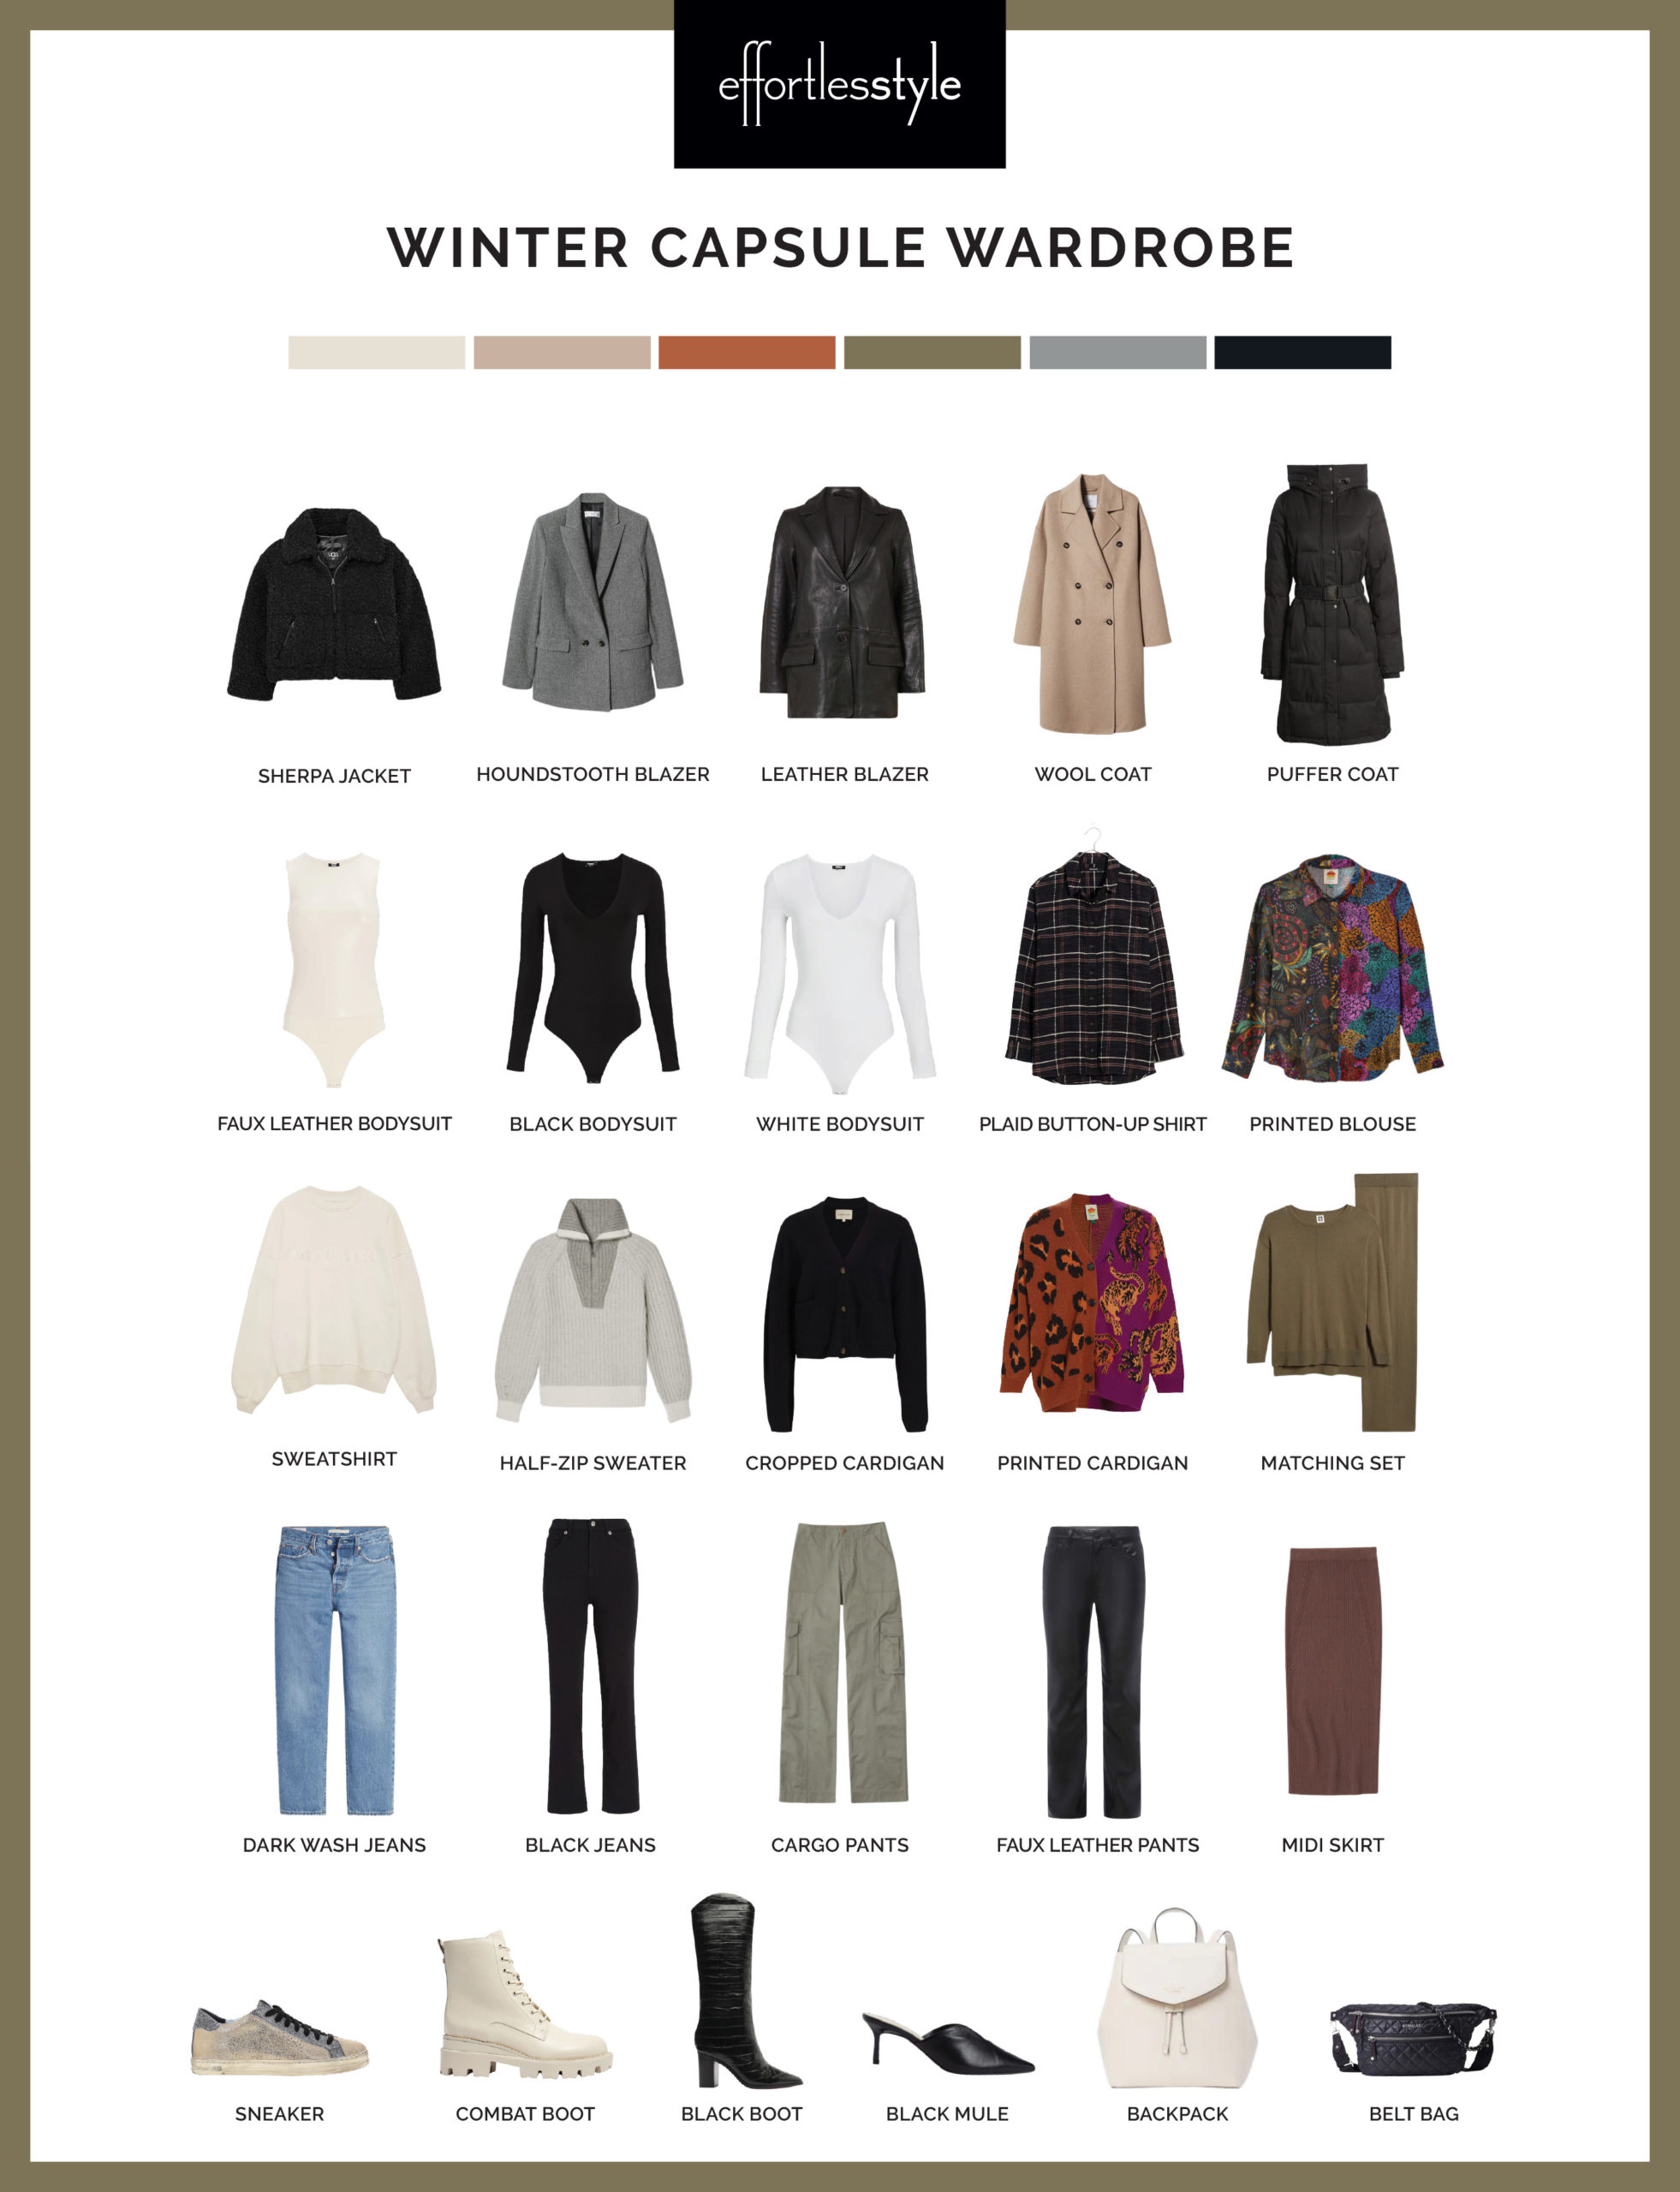 Winter Capsule Wardrobe Nashville are stylists share a capsule wardrobe for the winter personal stylists share a casual winter wardrobe how to create a casual winter capsule wardrobe how to make a winter capsule for everyday wear